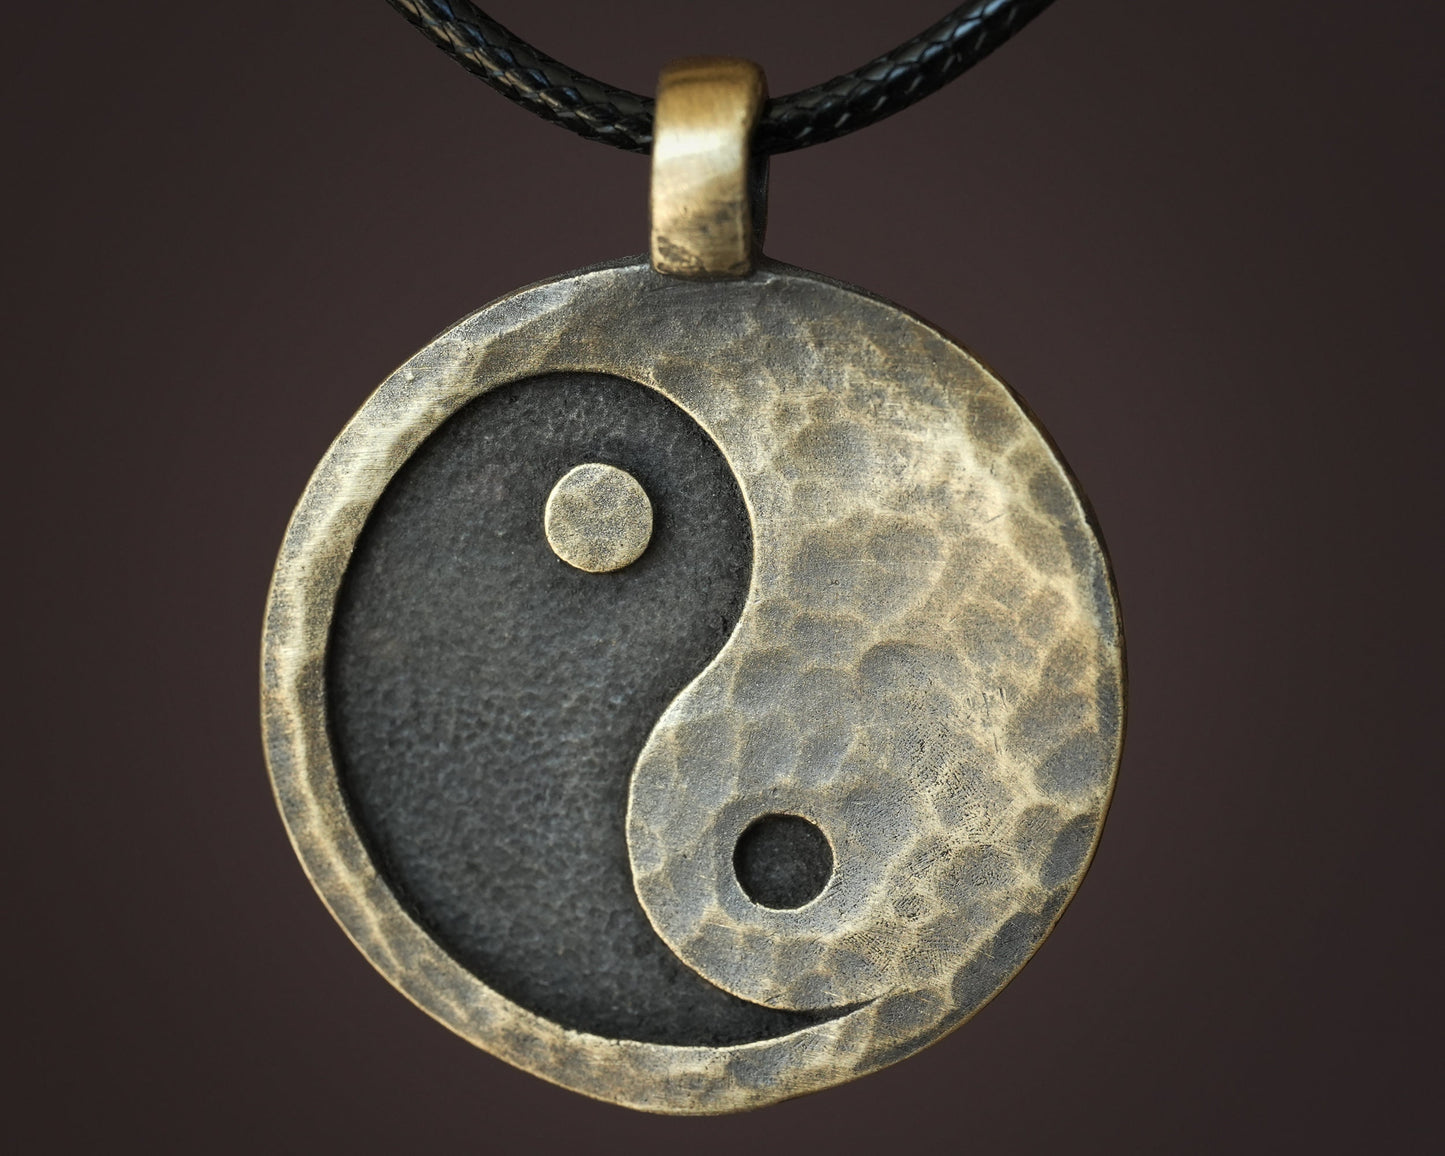 Hand Hammered Ancient Looking Yin Yang Leather Keychain For Men and Women